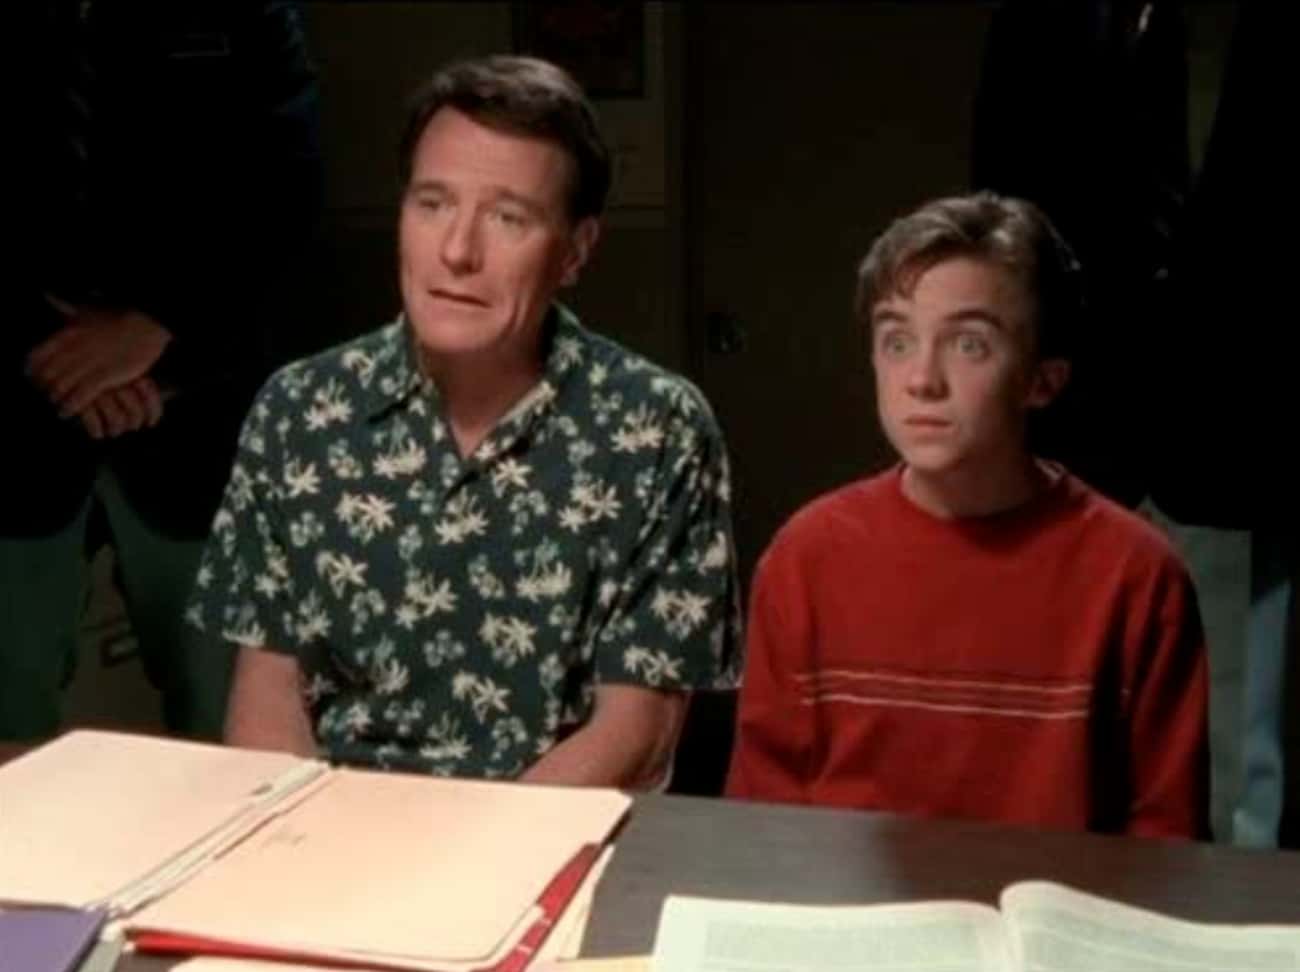 Bryan Cranston Is Good Friends With Frankie Muniz And Promised To Help Him With His Memory Loss